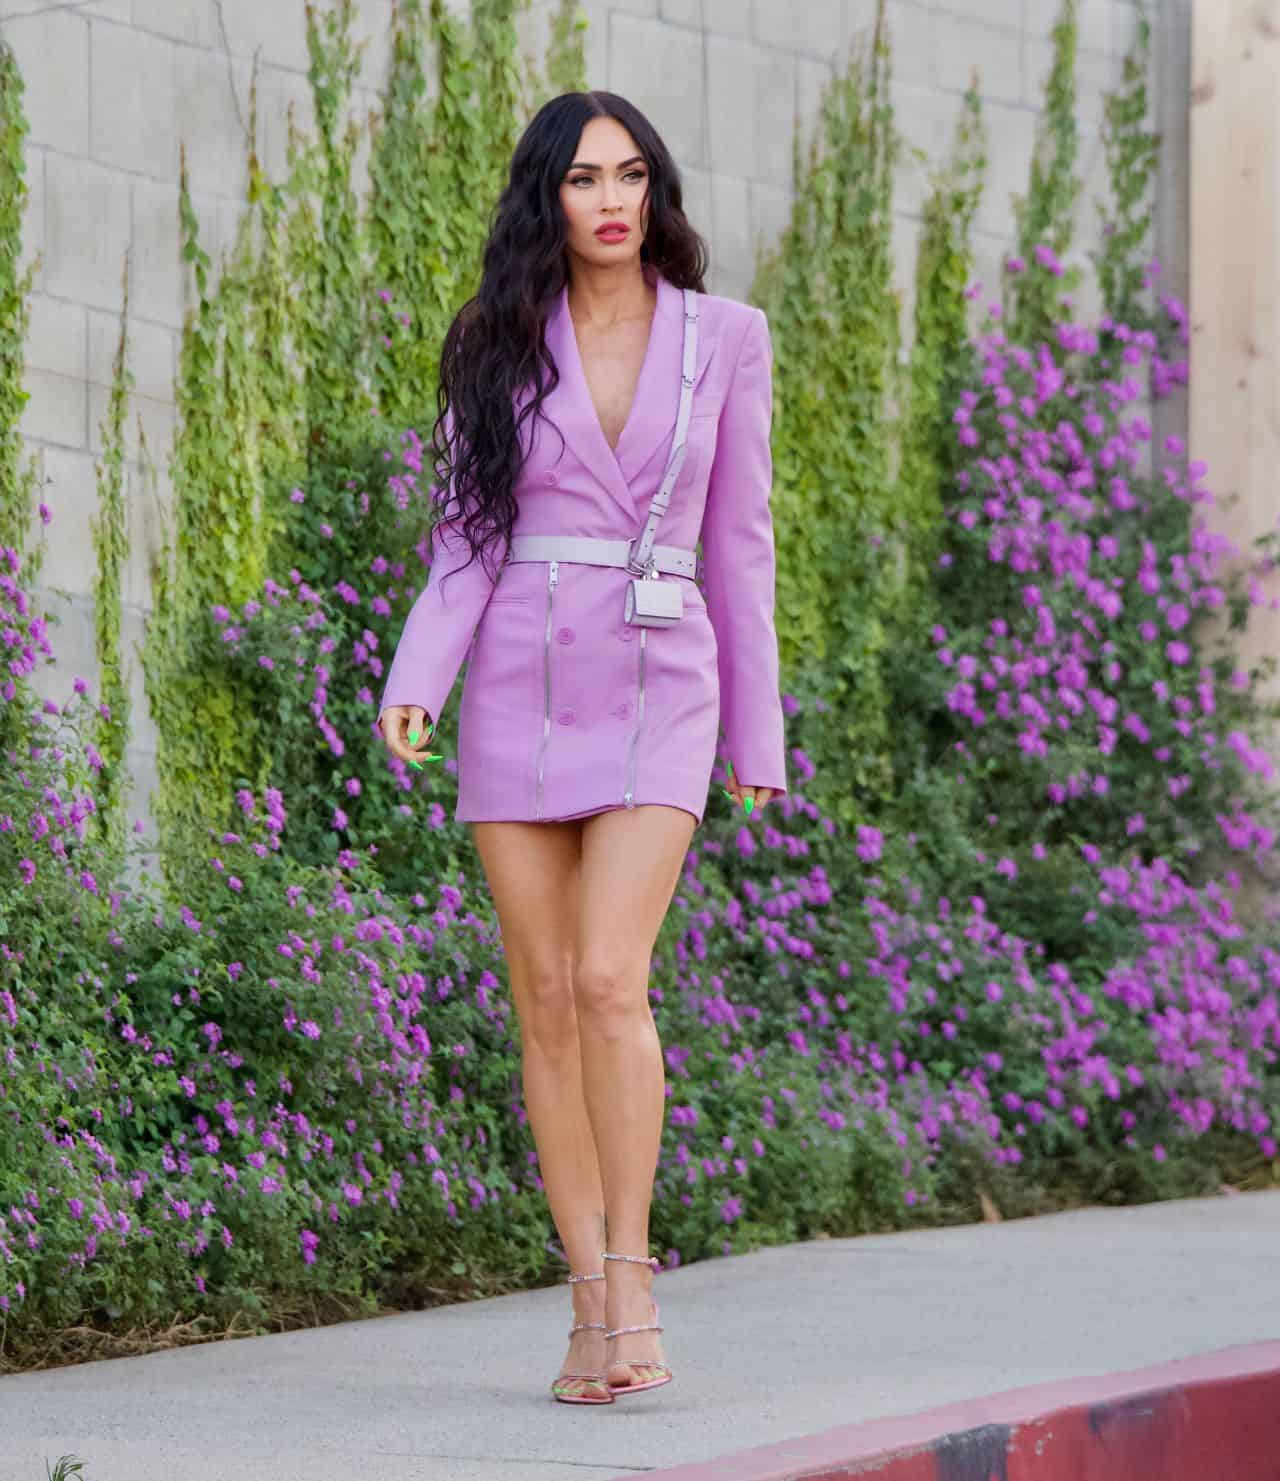 Megan Fox Wore Only a Pink Blazer with a Belt on her Business Meeting in LA